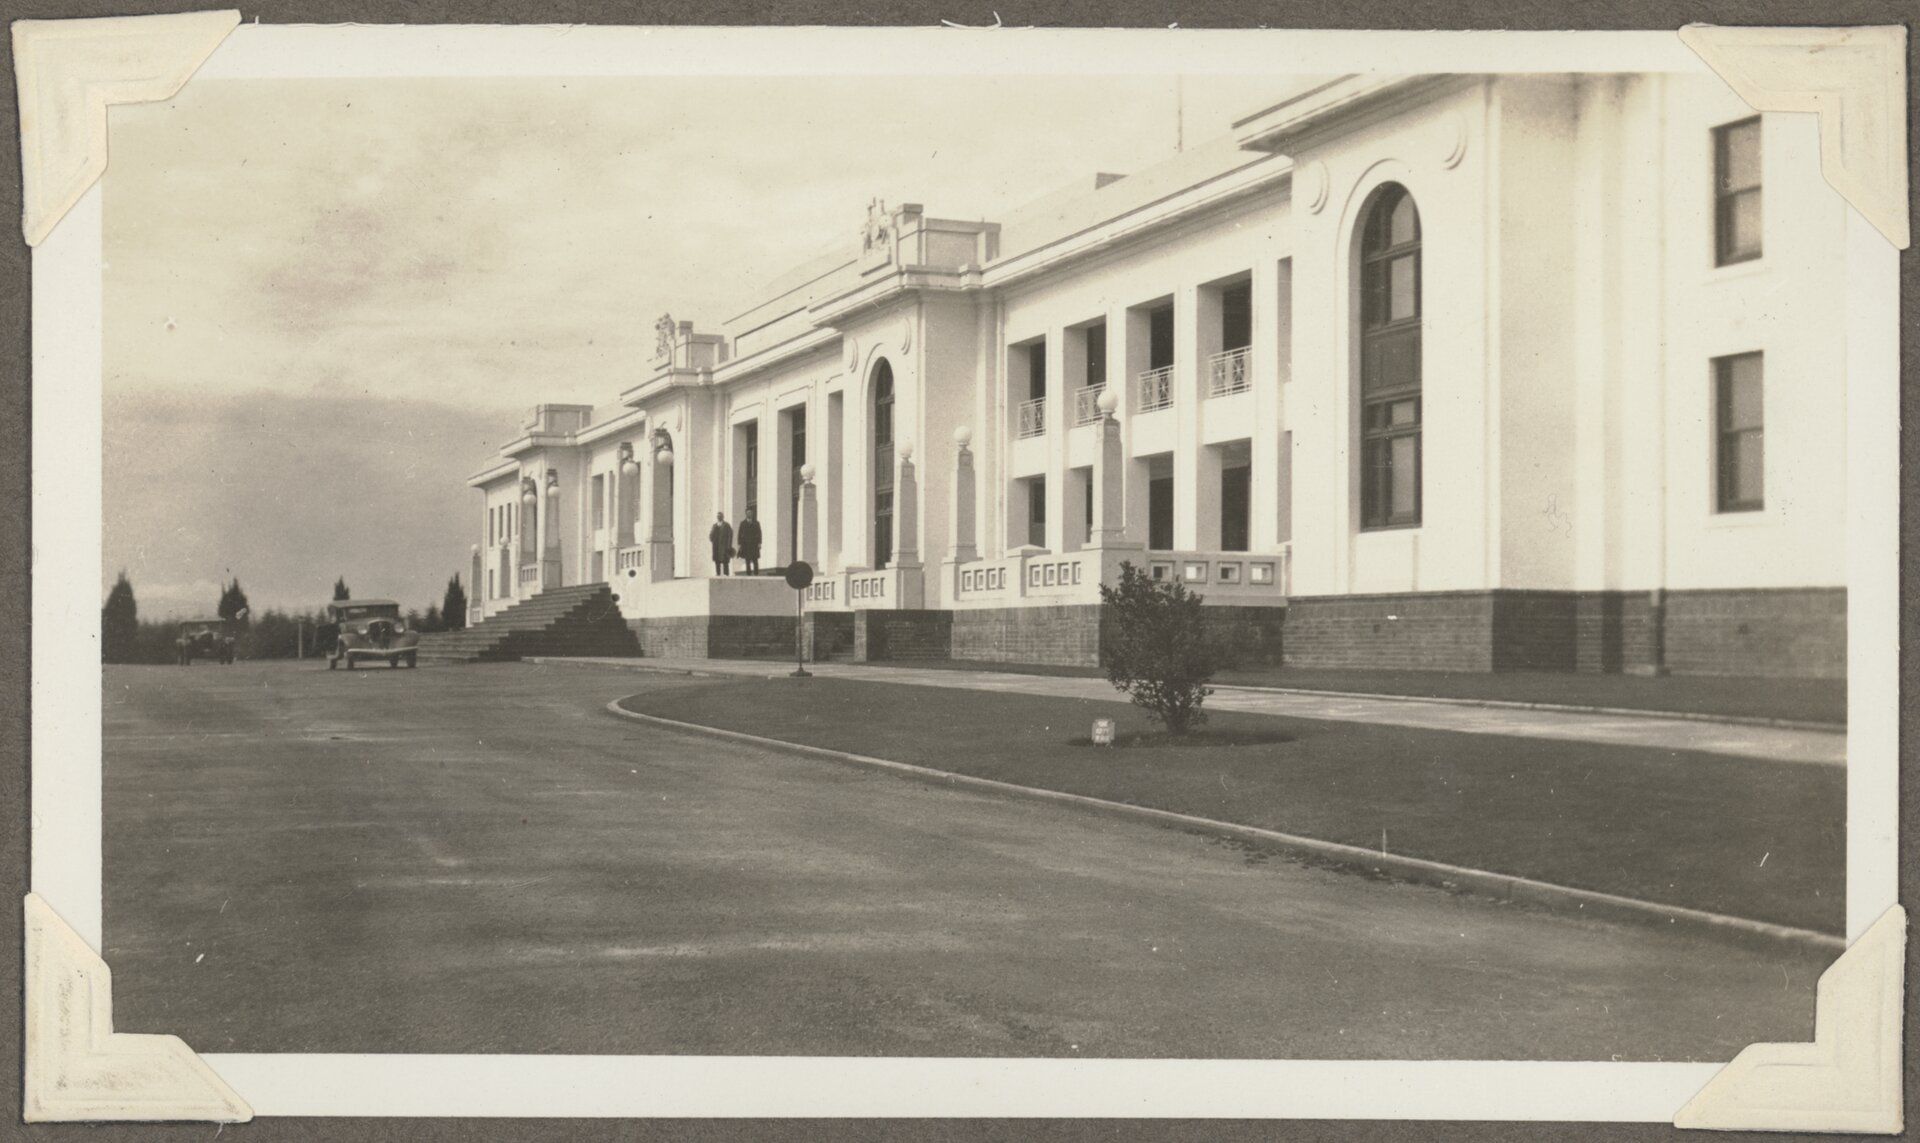 A view of old Parliament House from the driveway